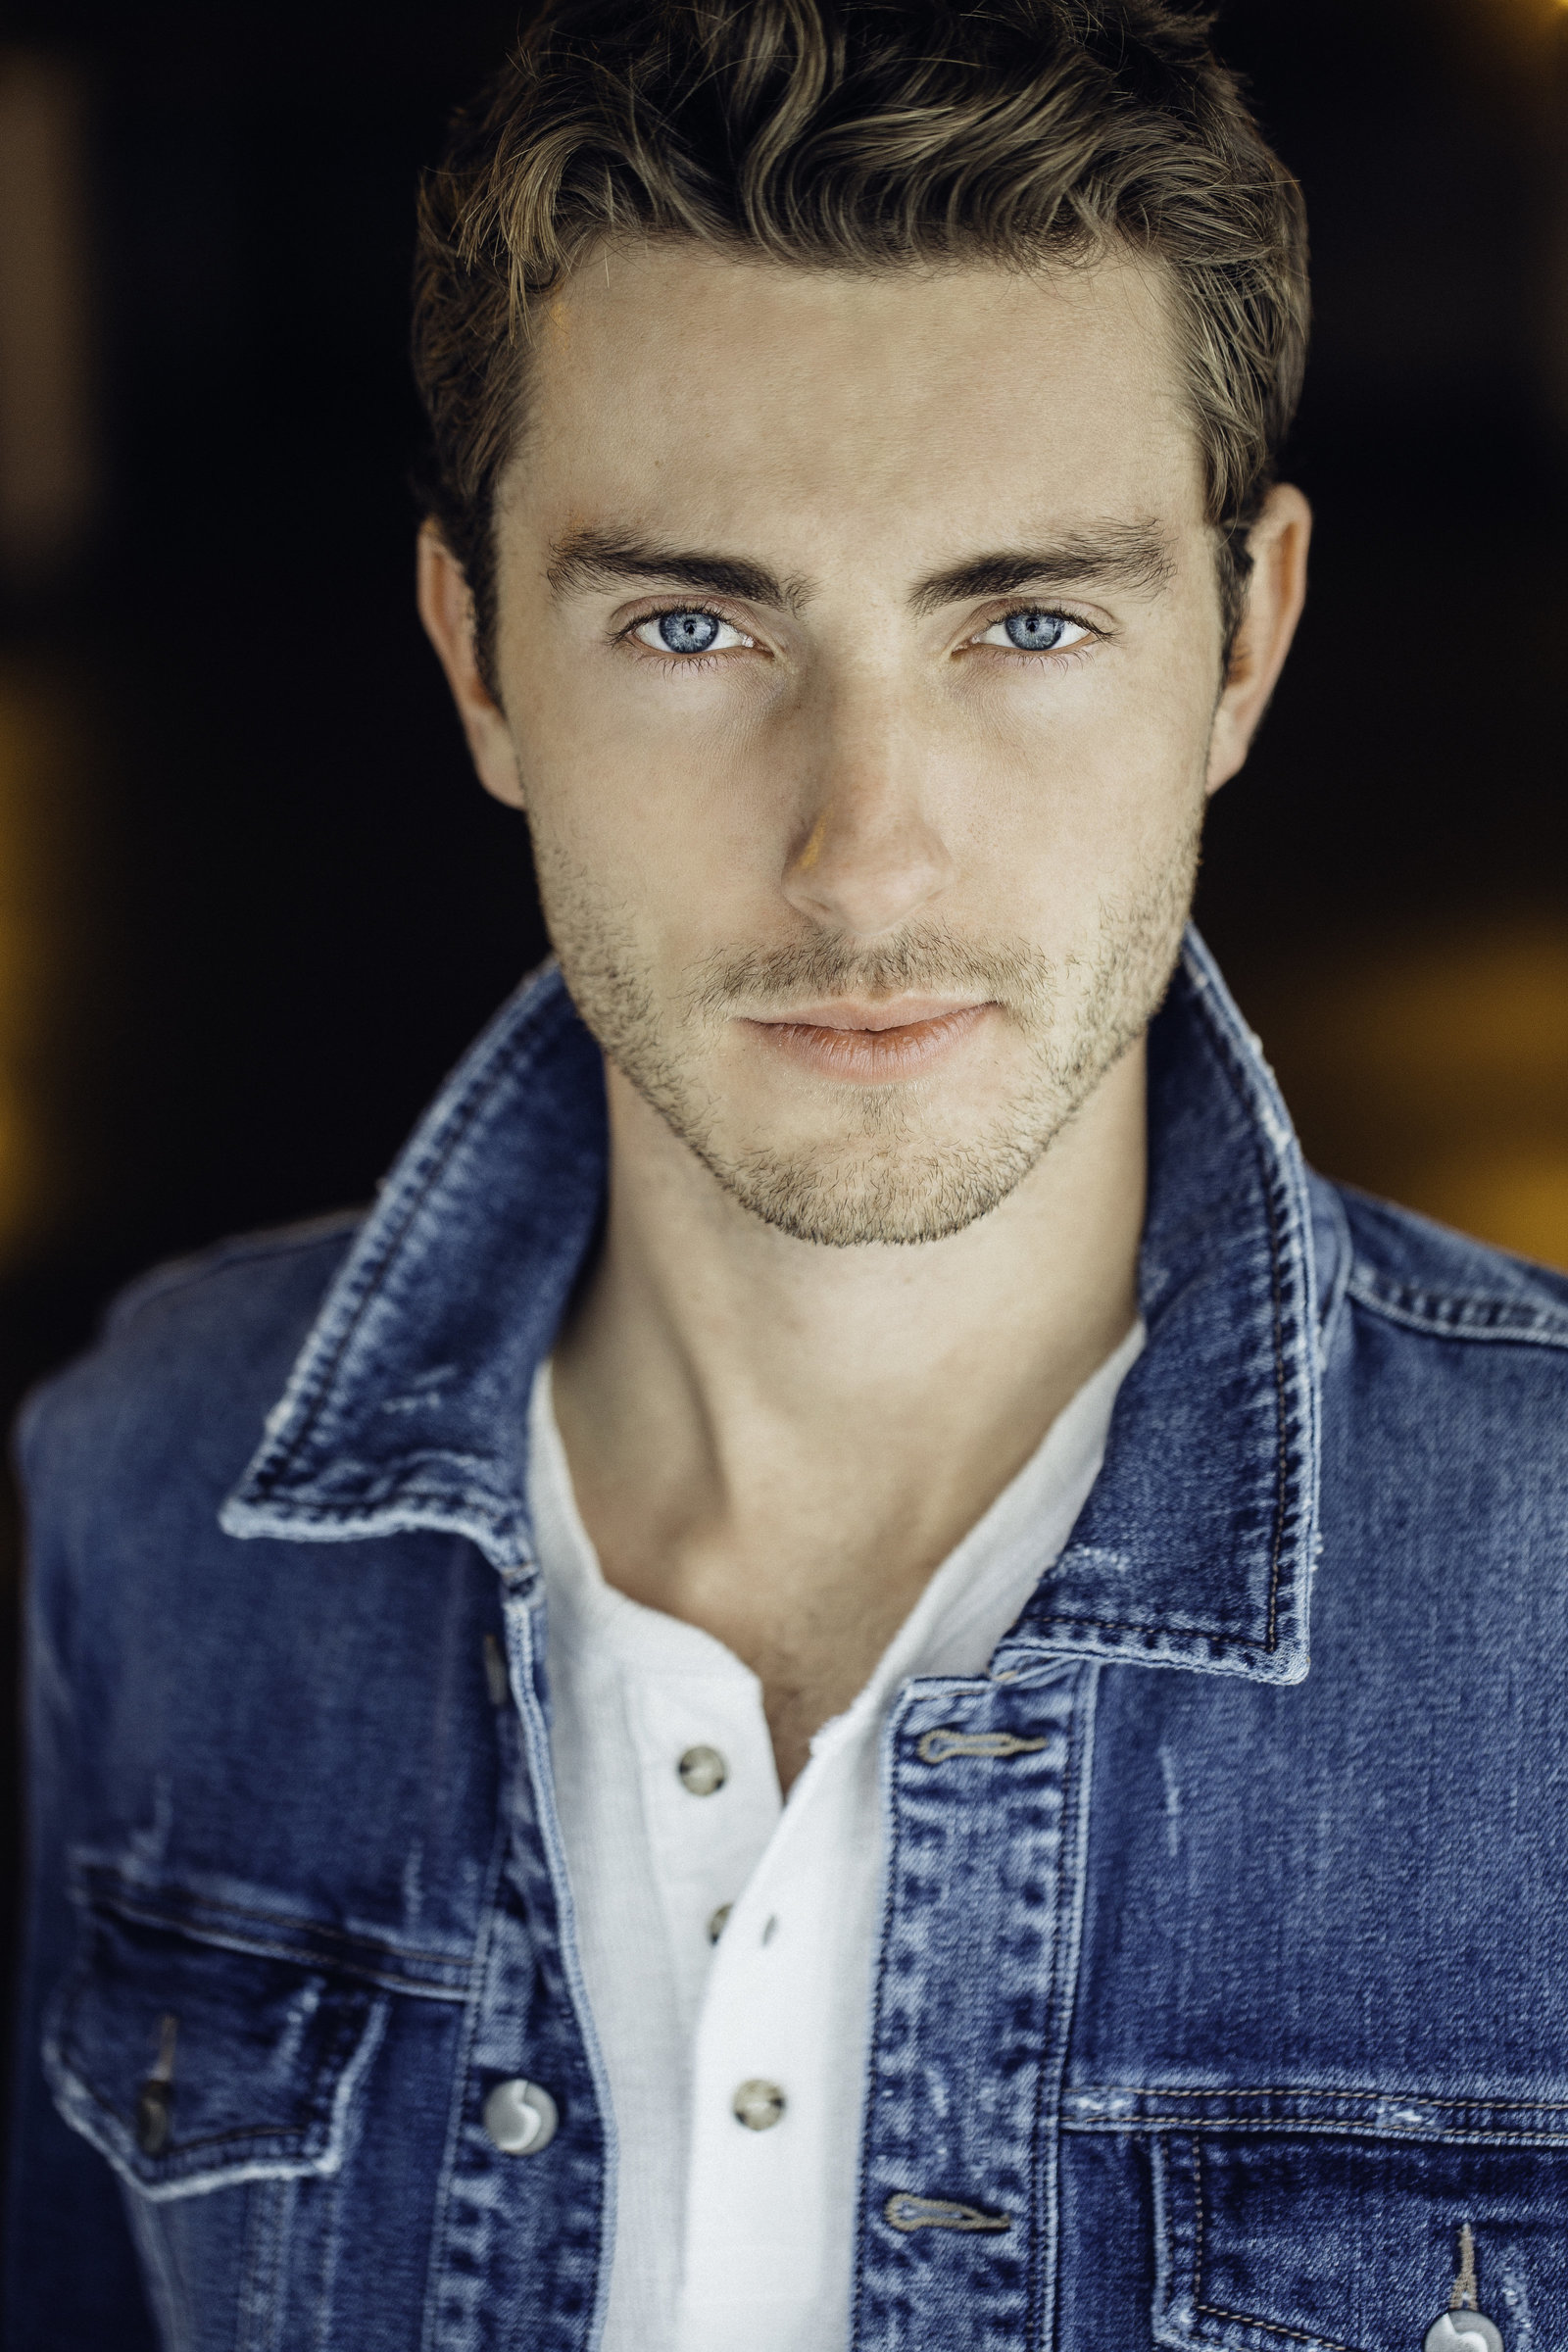 Headshot Photo Of Young Man In Outer Blue Denim Jacket And White Polo